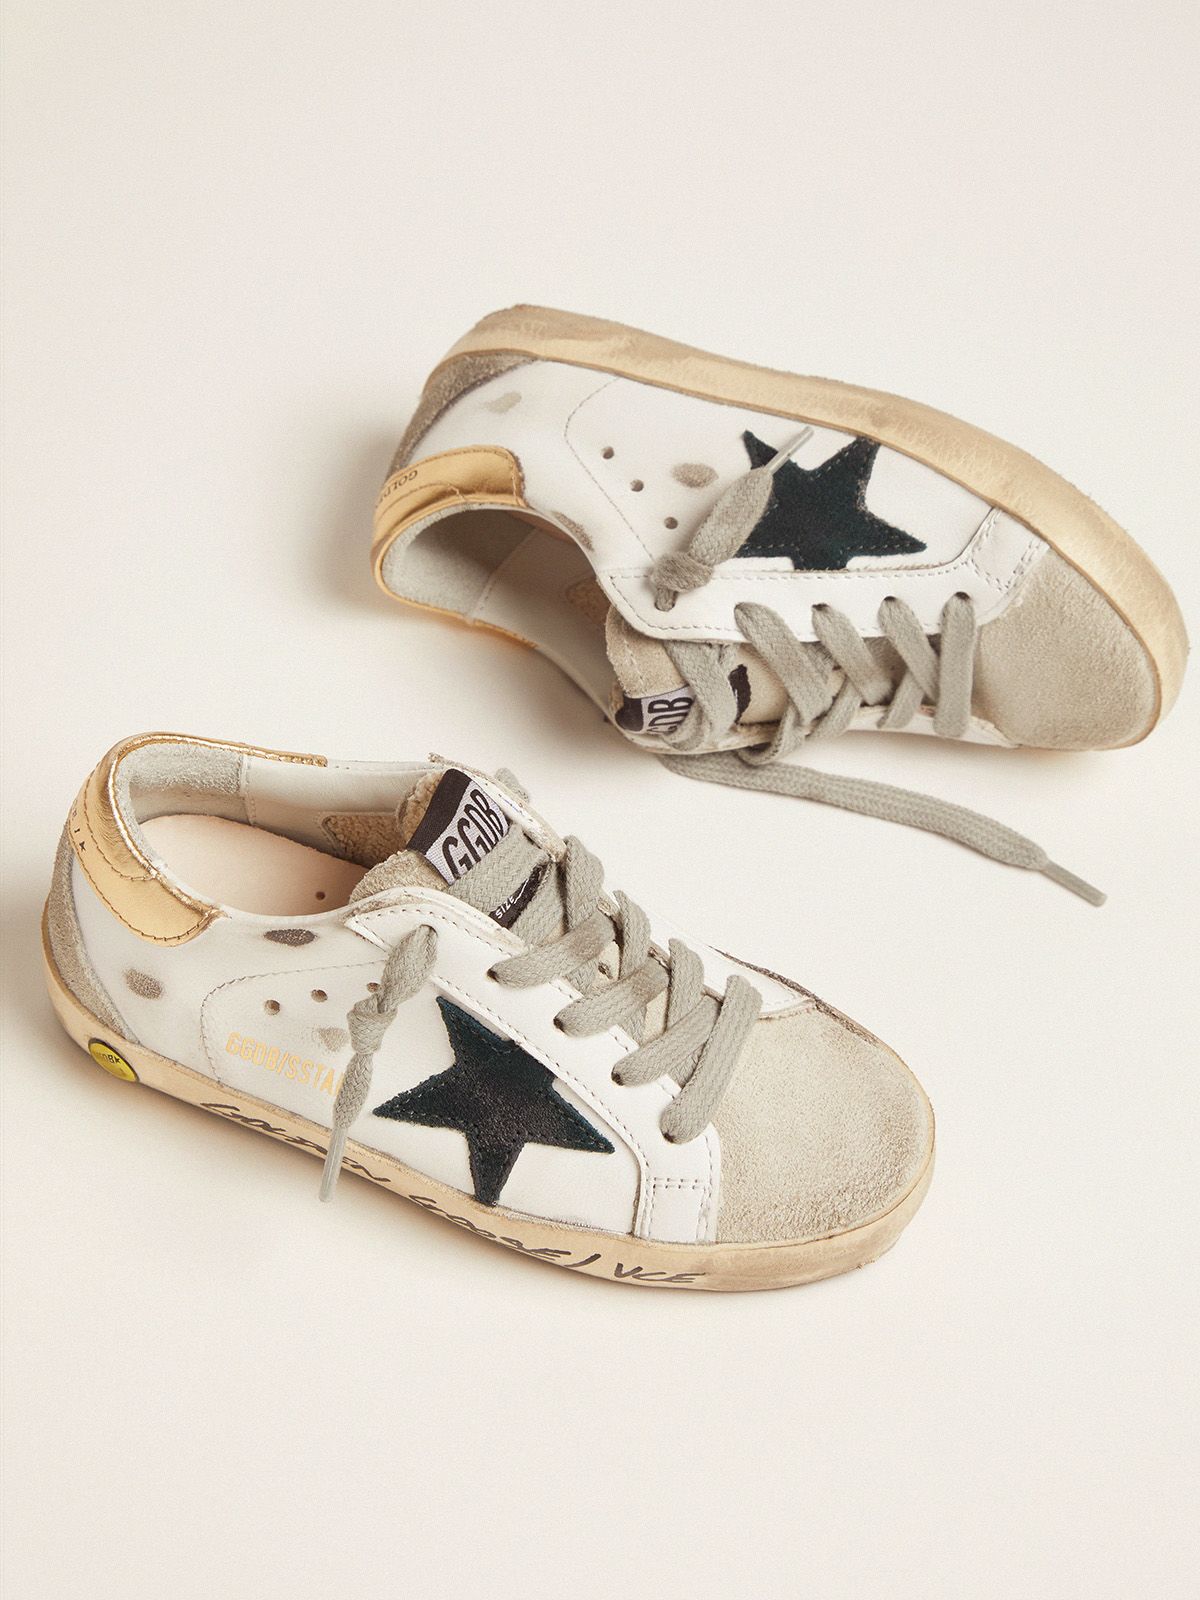 Super Star Sneakers With Gold Heel Tab And Handwritten Lettering Golden Goose